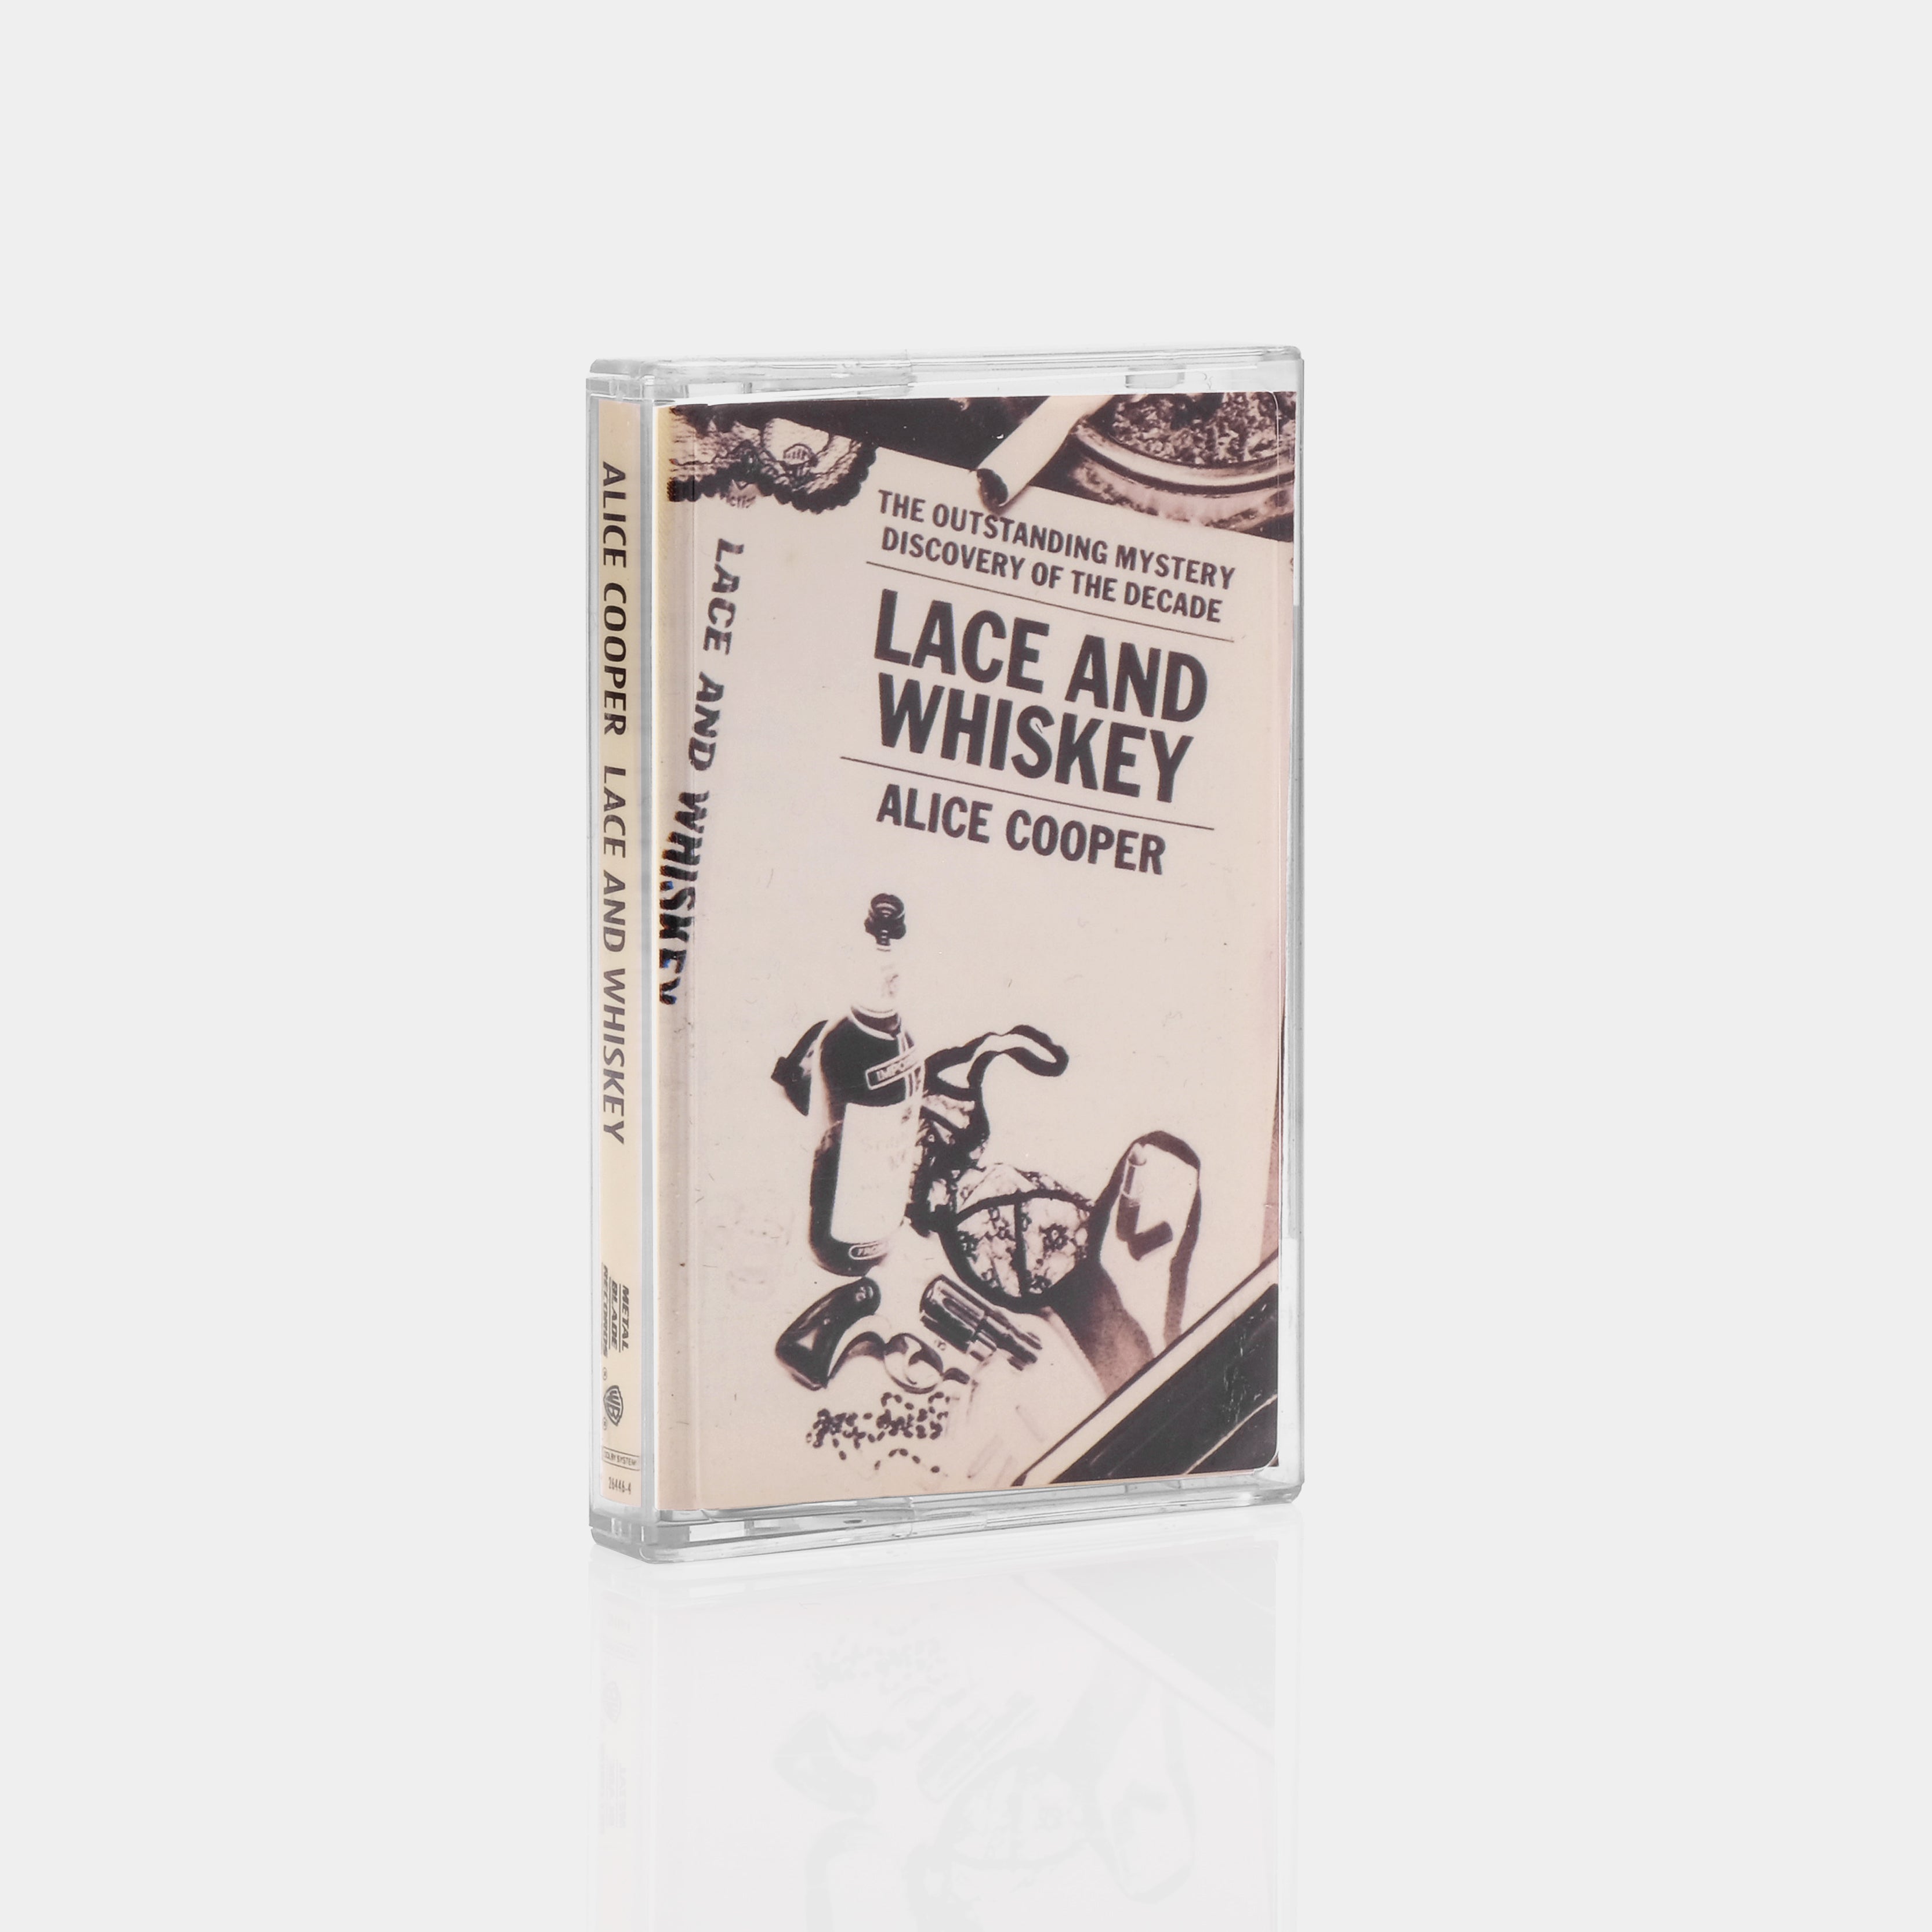 Alice Cooper - Lace And Whiskey Cassette Tape